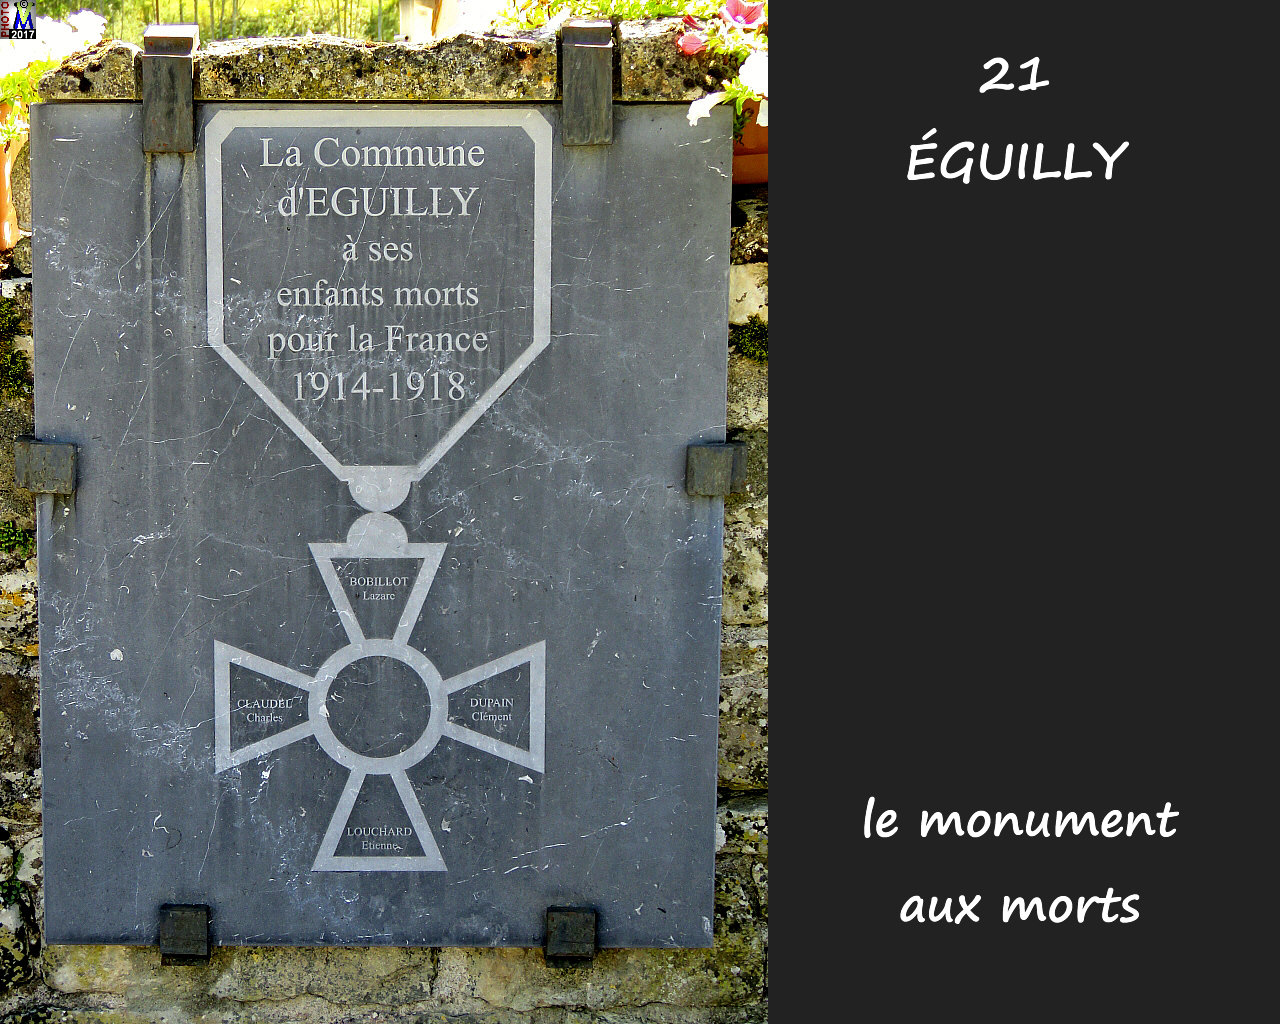 21EGUILLY_morts_100.jpg